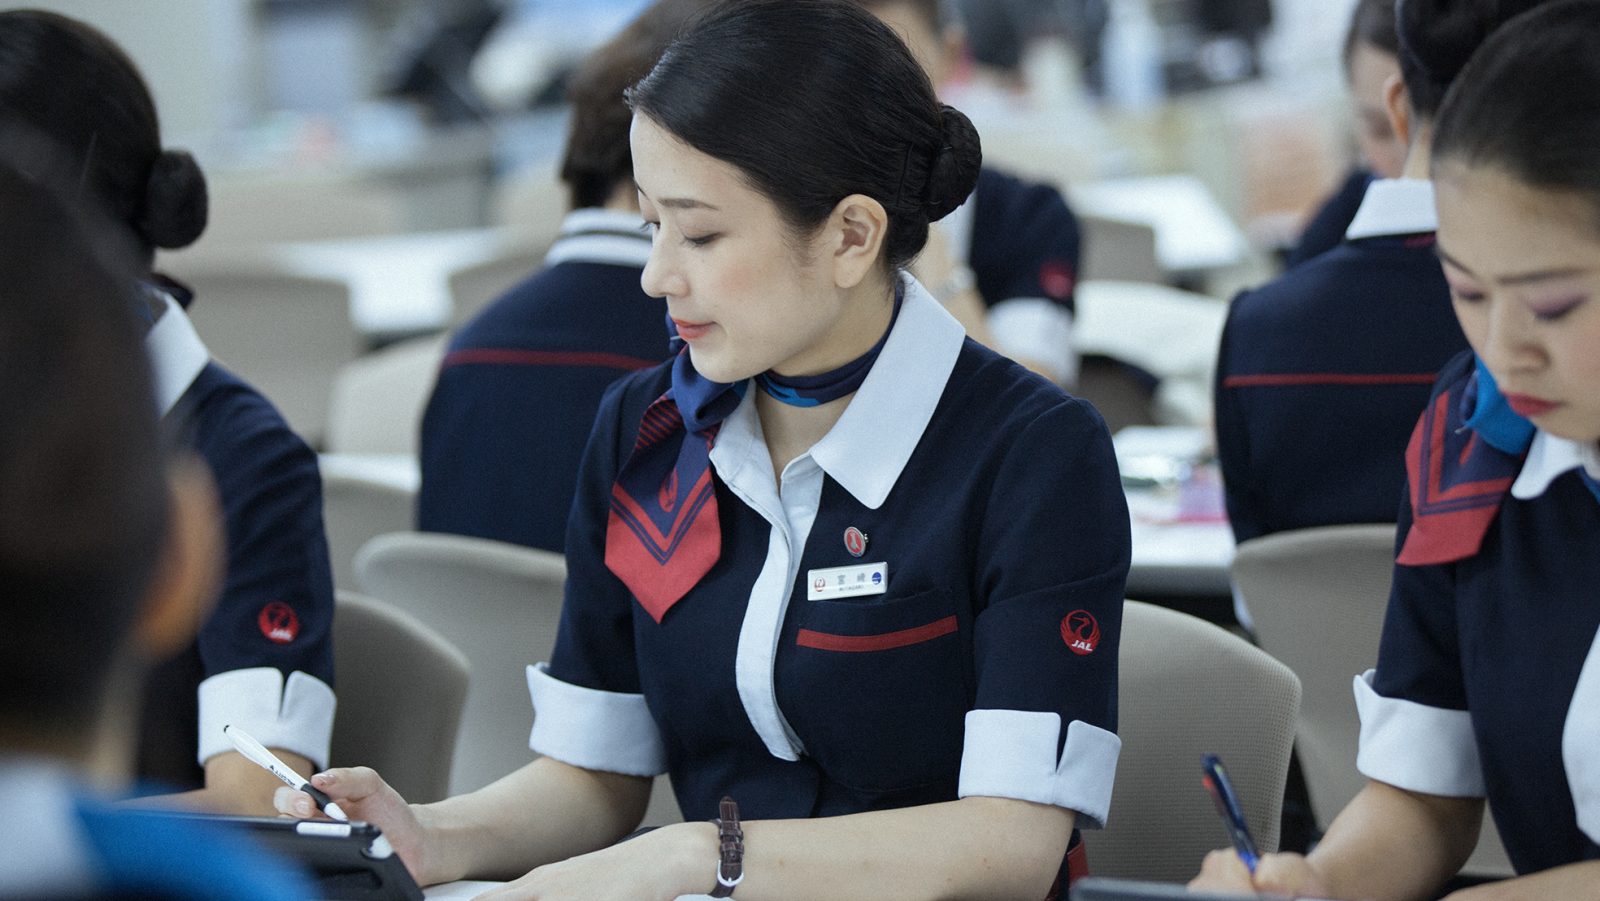 Only 1% of Cabin Crew at Japenese Airlines are Men: Change is Coming Slowly